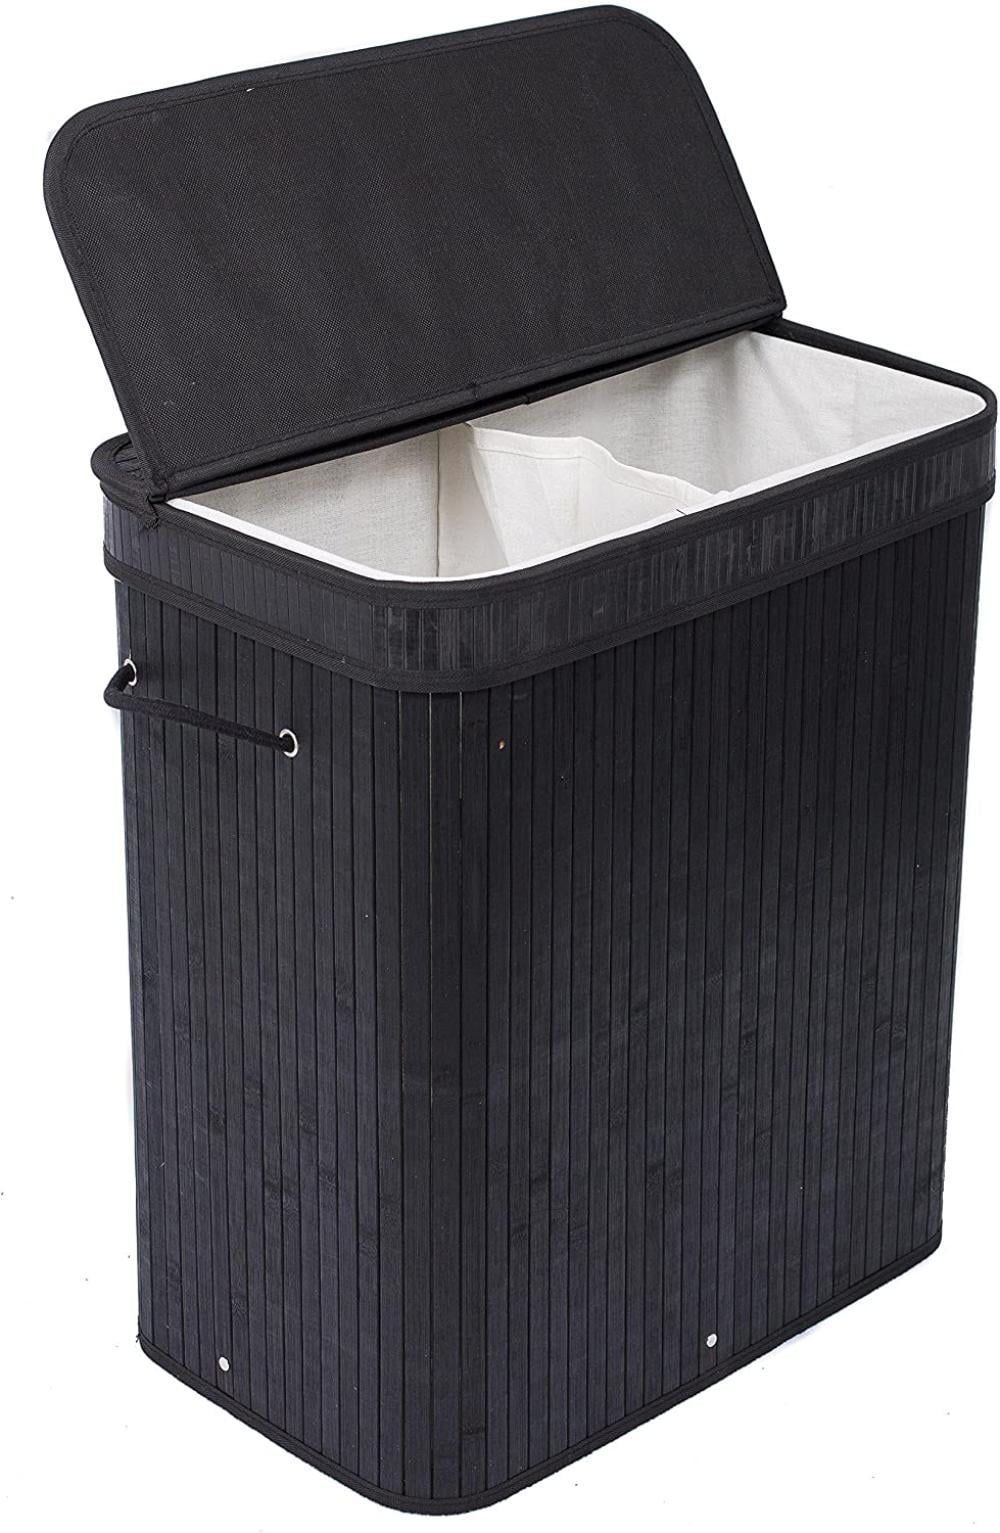 Dirty Clothes Sorter BIRDROCK HOME Folding Cloth Laundry Hamper with Handles 